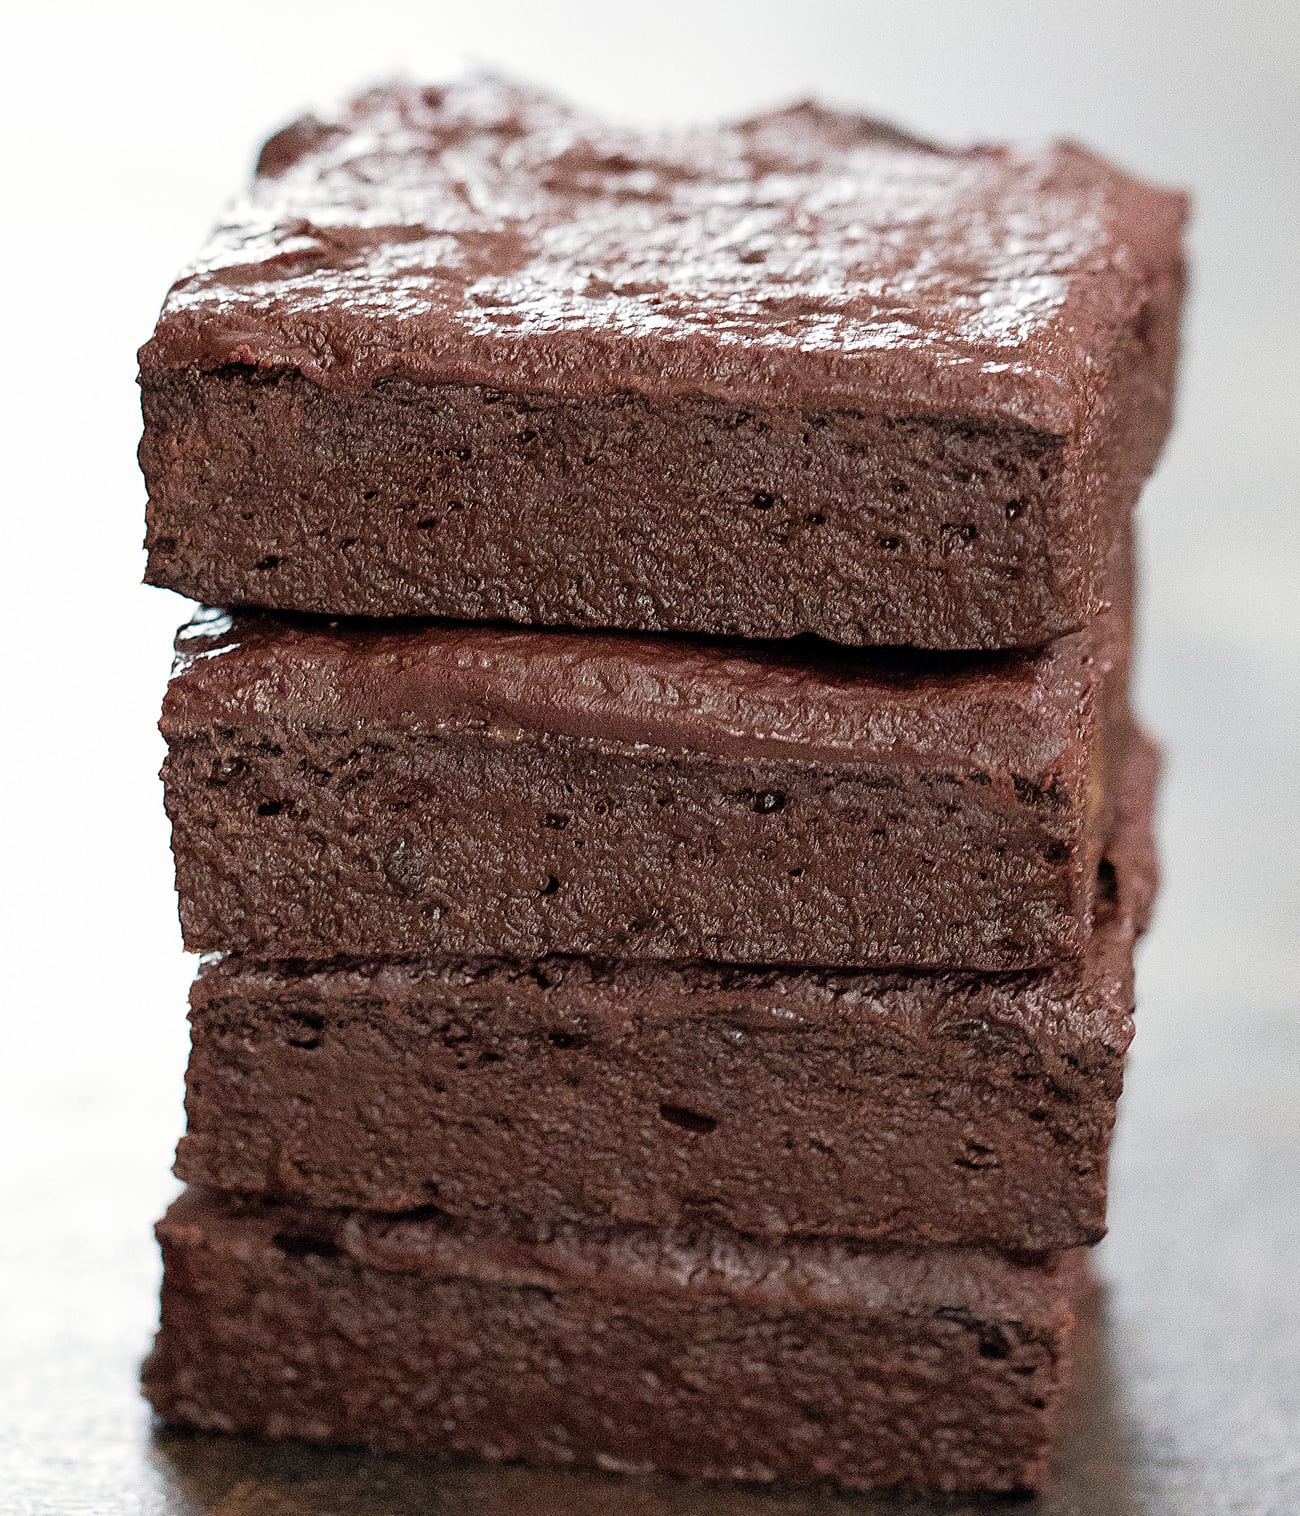 The BEST Eggless Chocolate Brownie Recipe with cocoa powder